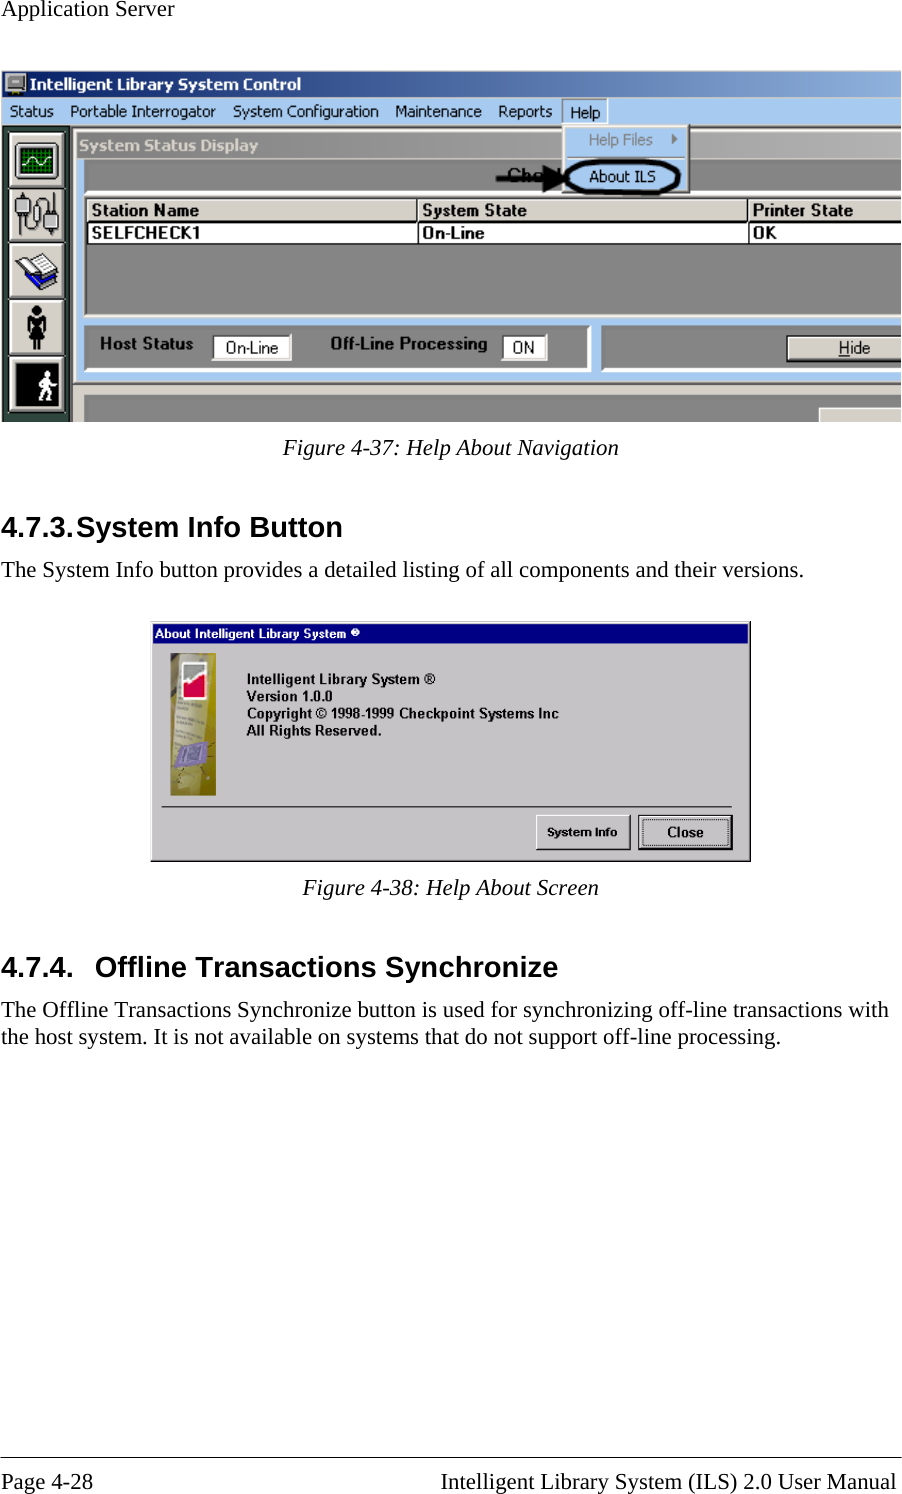 Application Server  Figure 4-37: Help About Navigation 4.7.3. System Info Button  The System Info button provides a detailed listing of all components and their versions.   Figure 4-38: Help About Screen 4.7.4.  Offline Transactions Synchronize  The Offline Transactions Synchronize button is used for synchronizing off-line transactions with the host system. It is not available on systems that do not support off-line processing.   Page 4-28                                                       Intelligent Library System (ILS) 2.0 User Manual 